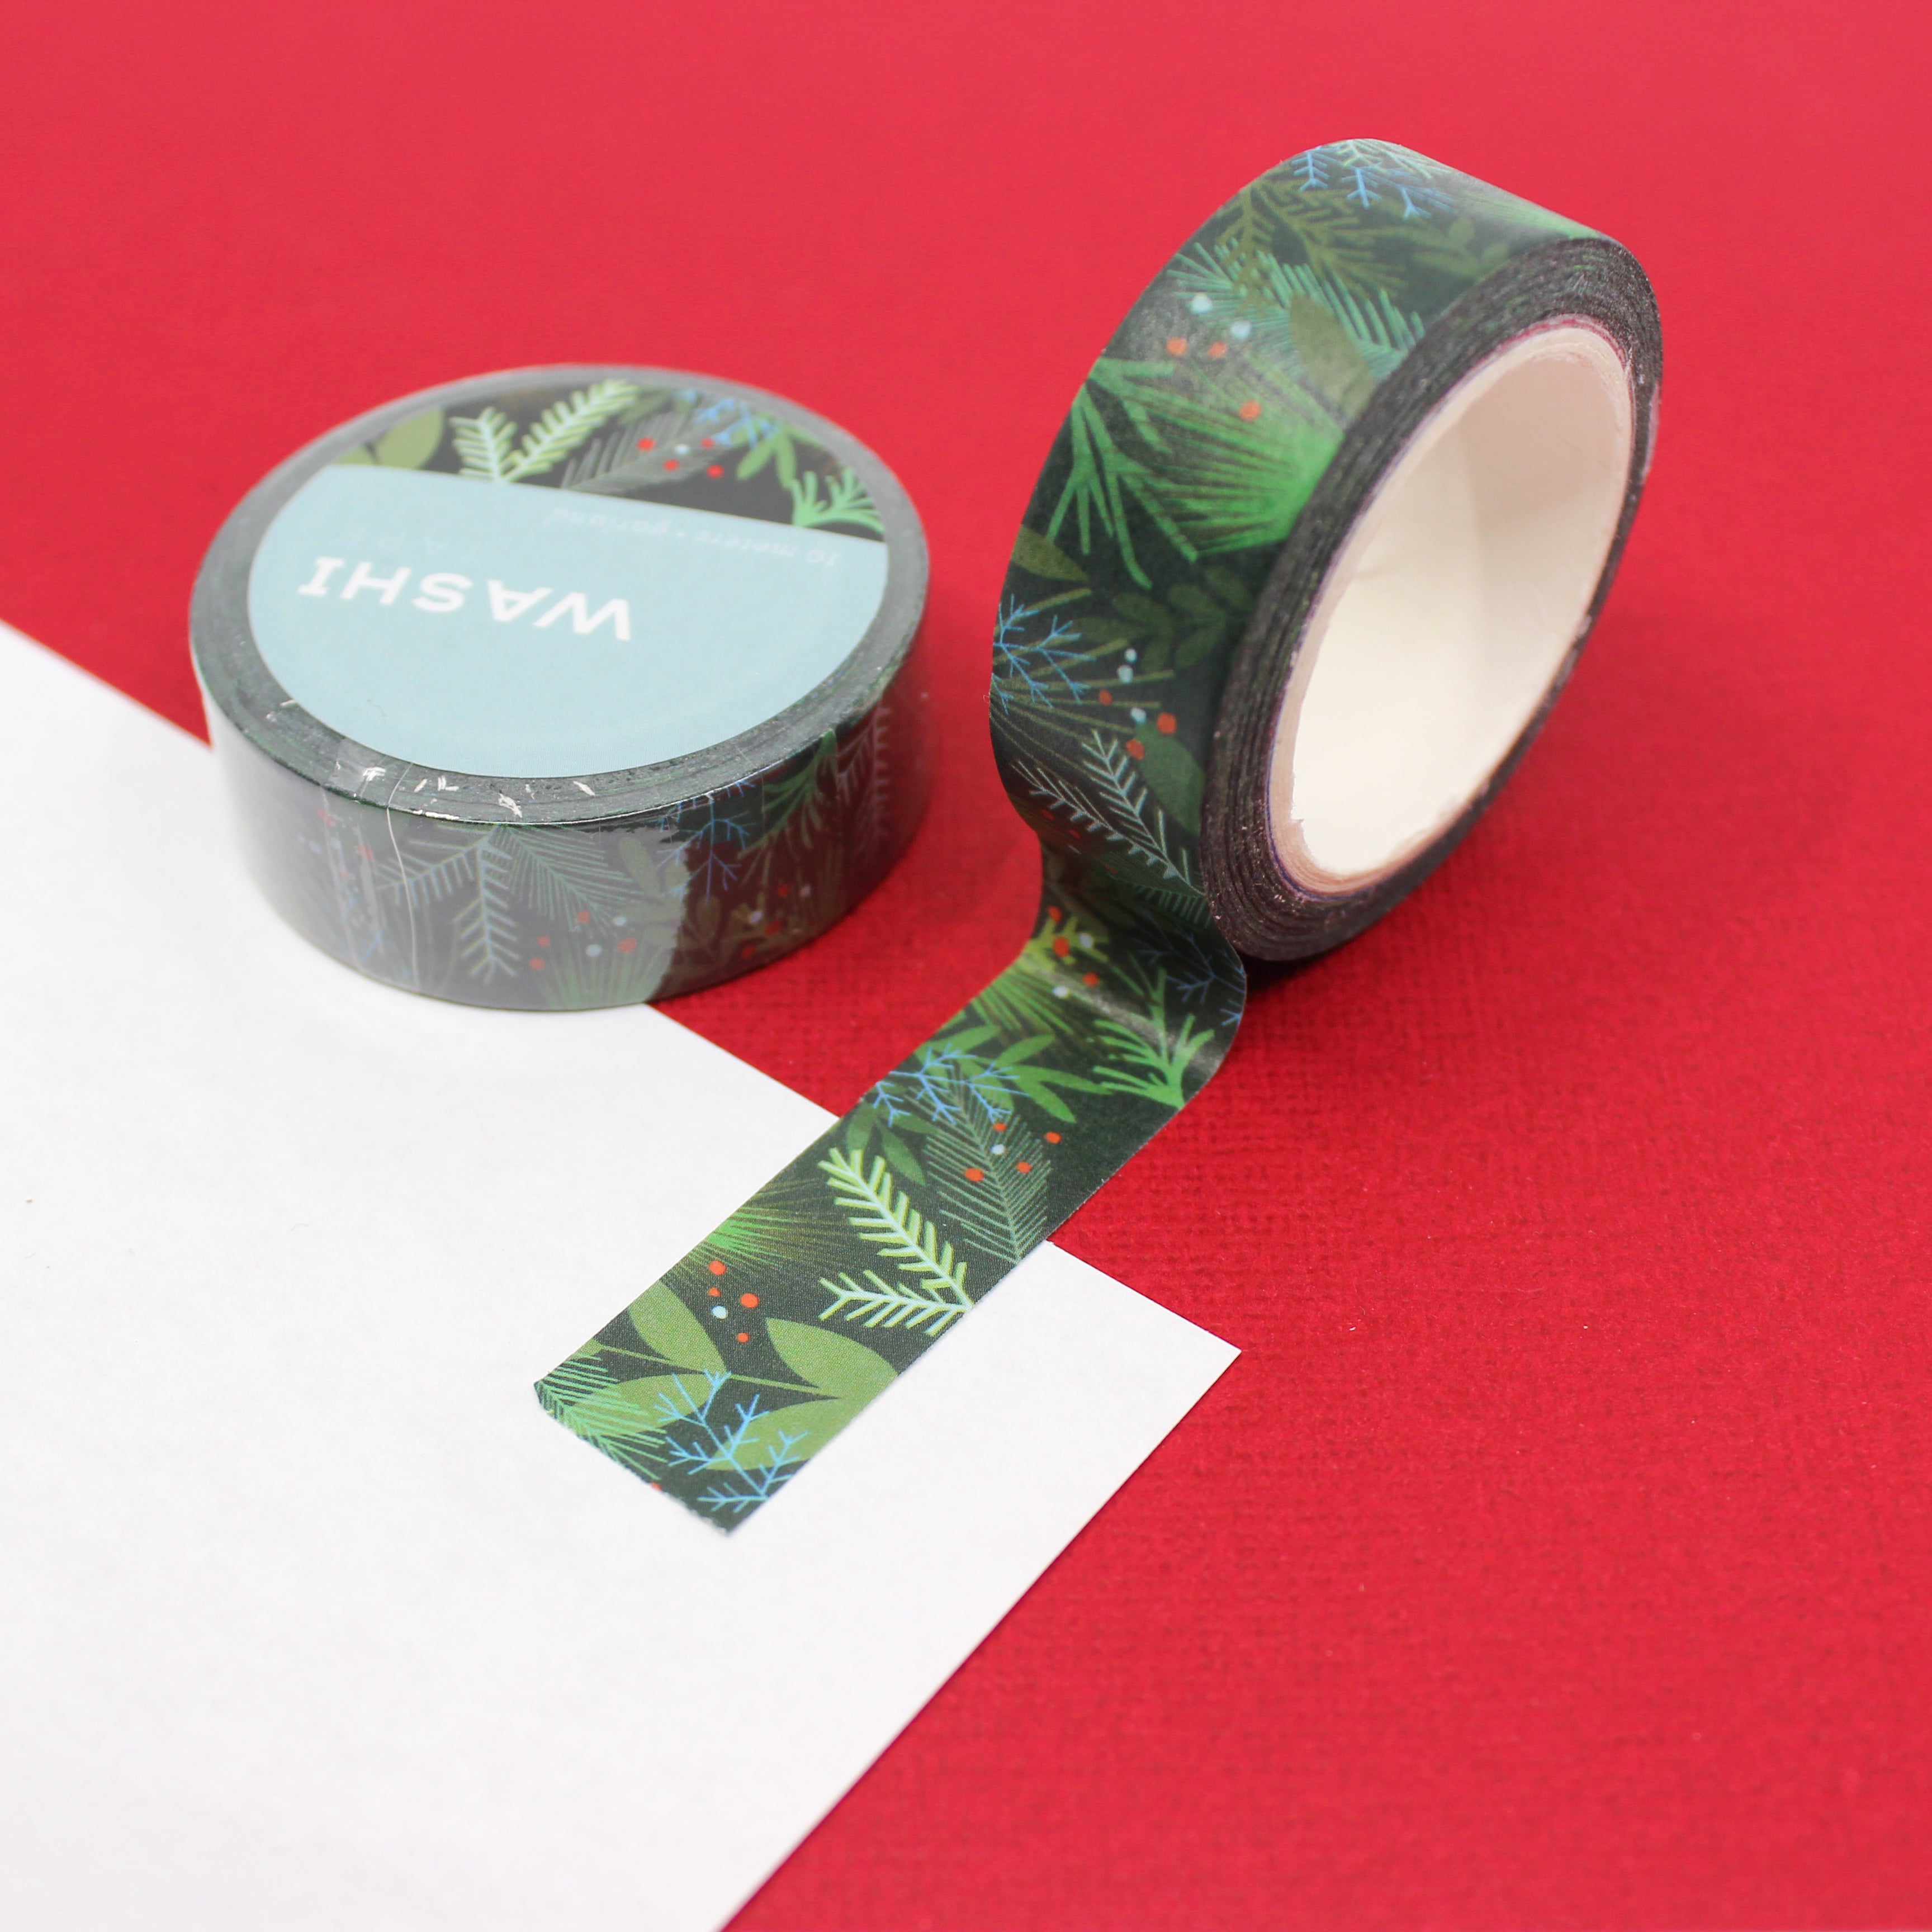 This is a Holiday garland pattern washi tape from BBB Supplies Craft Shop